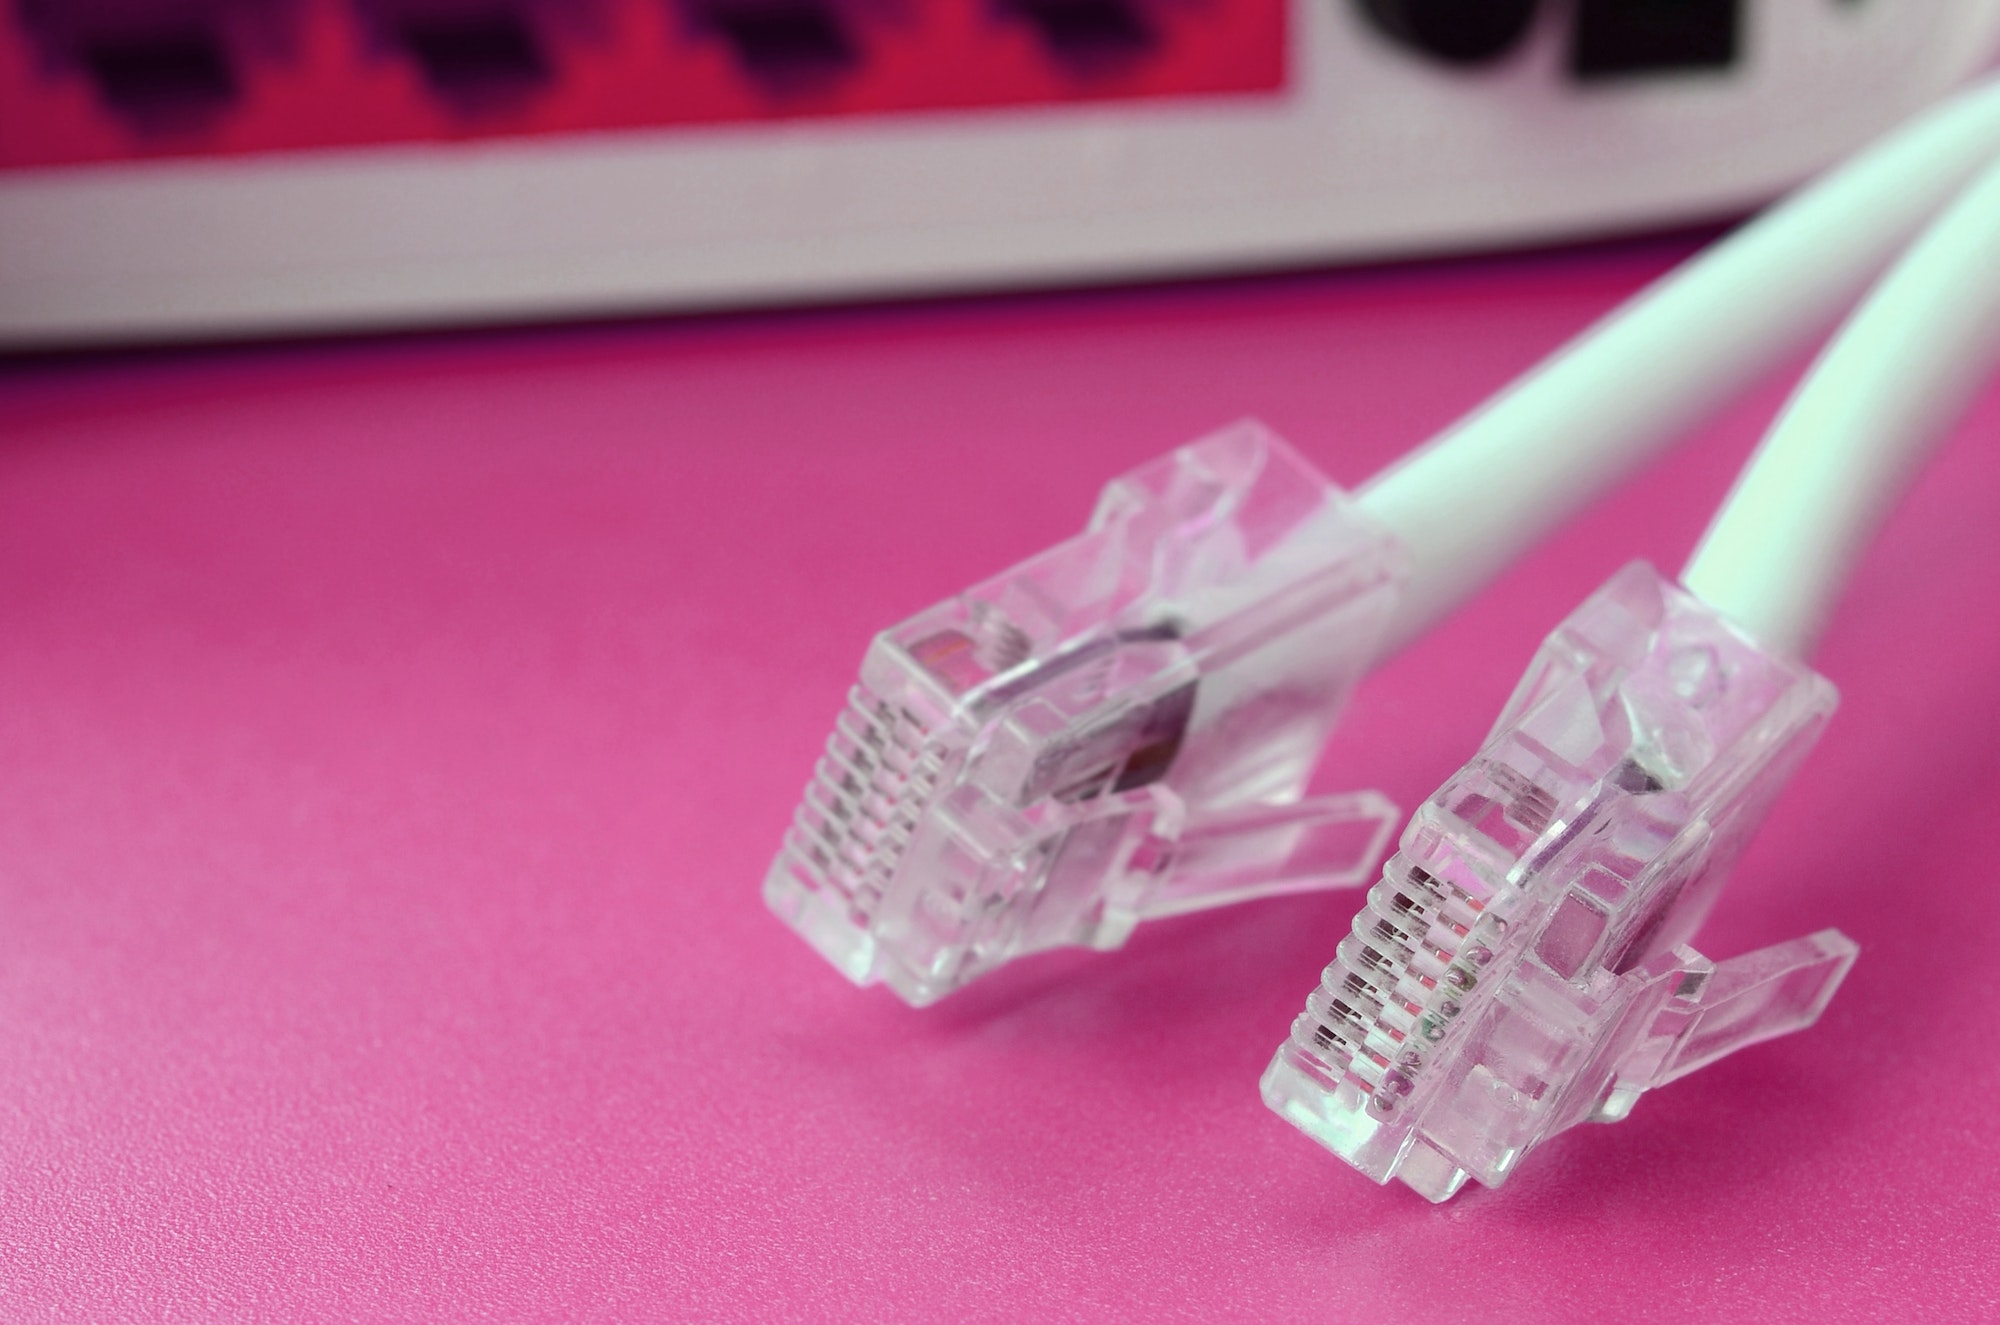 Internet router and Internet cable plugs lie on a bright pink background. Items required for Intern